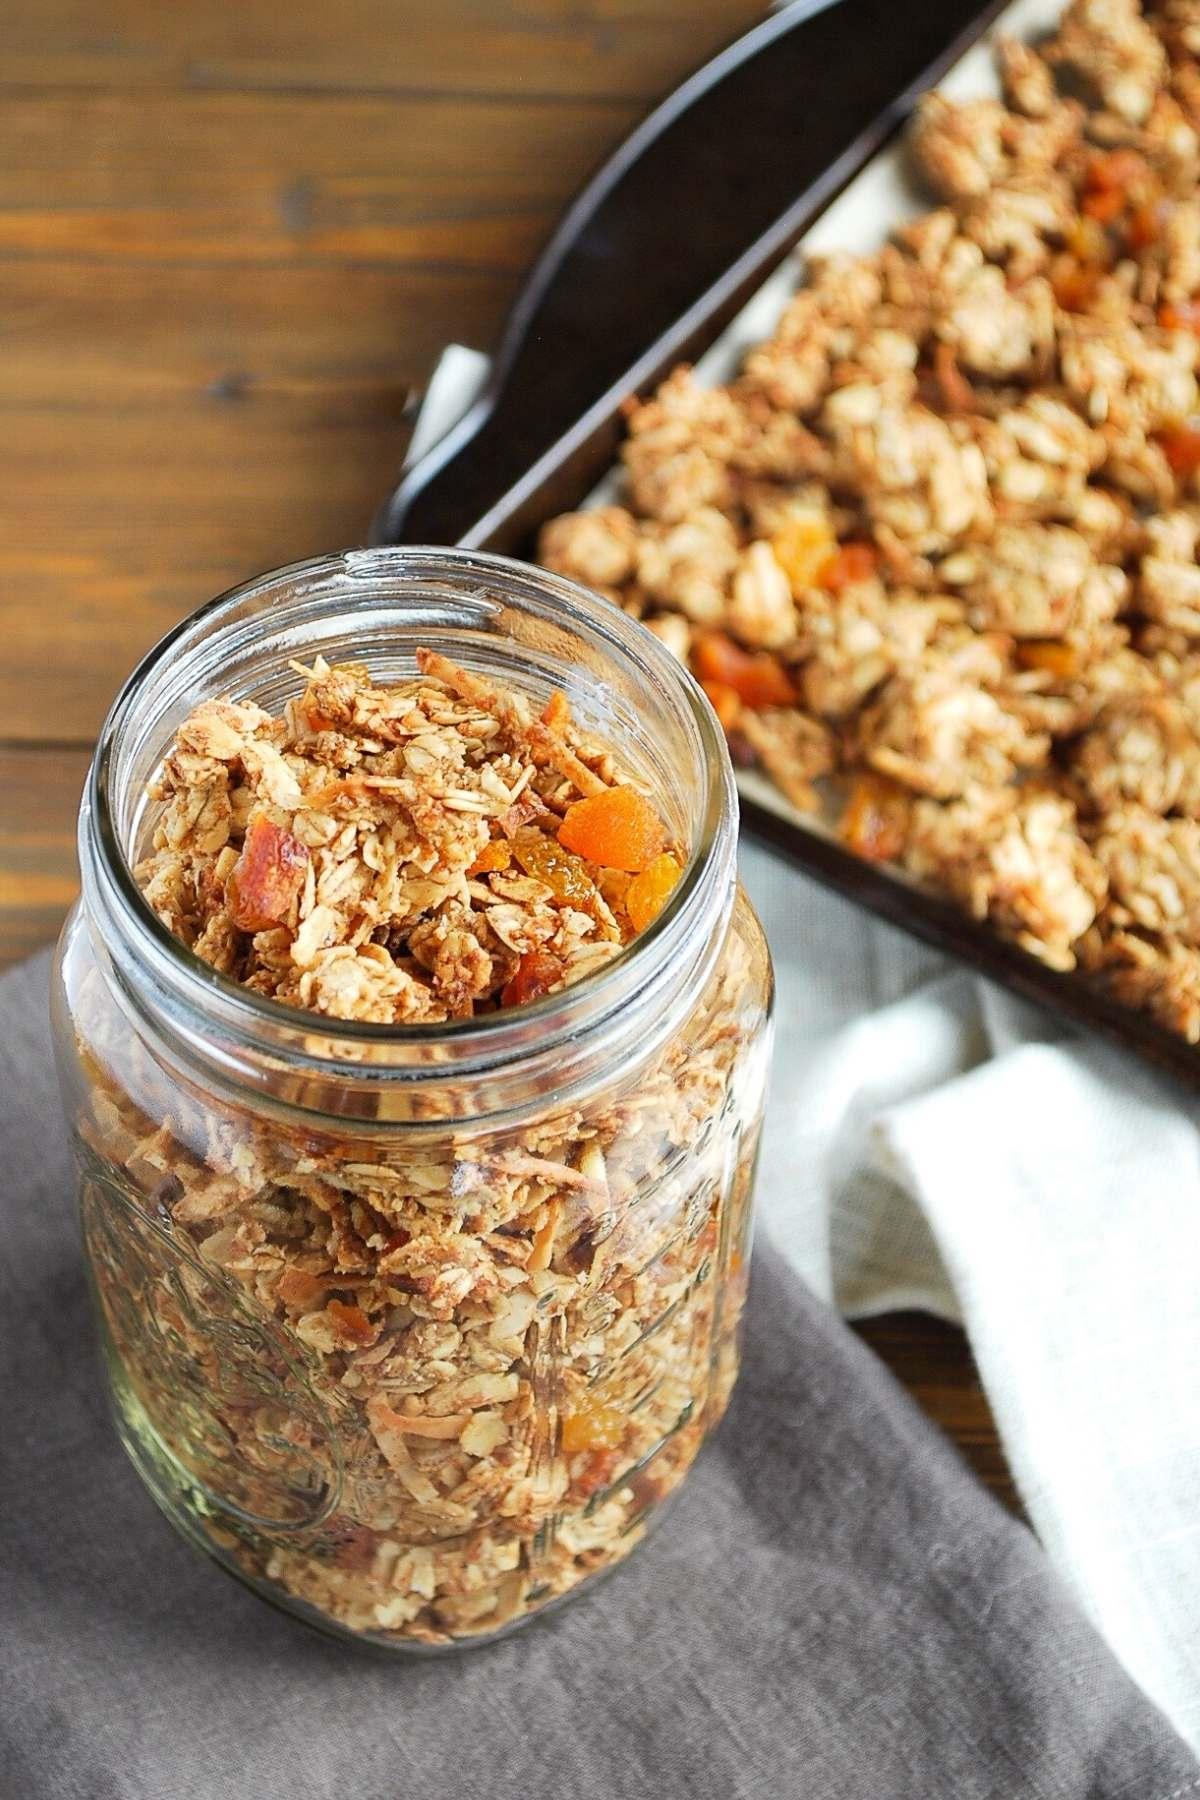 Vanilla Almond Granola with Apricots and Almonds- Amee's Savory Dish